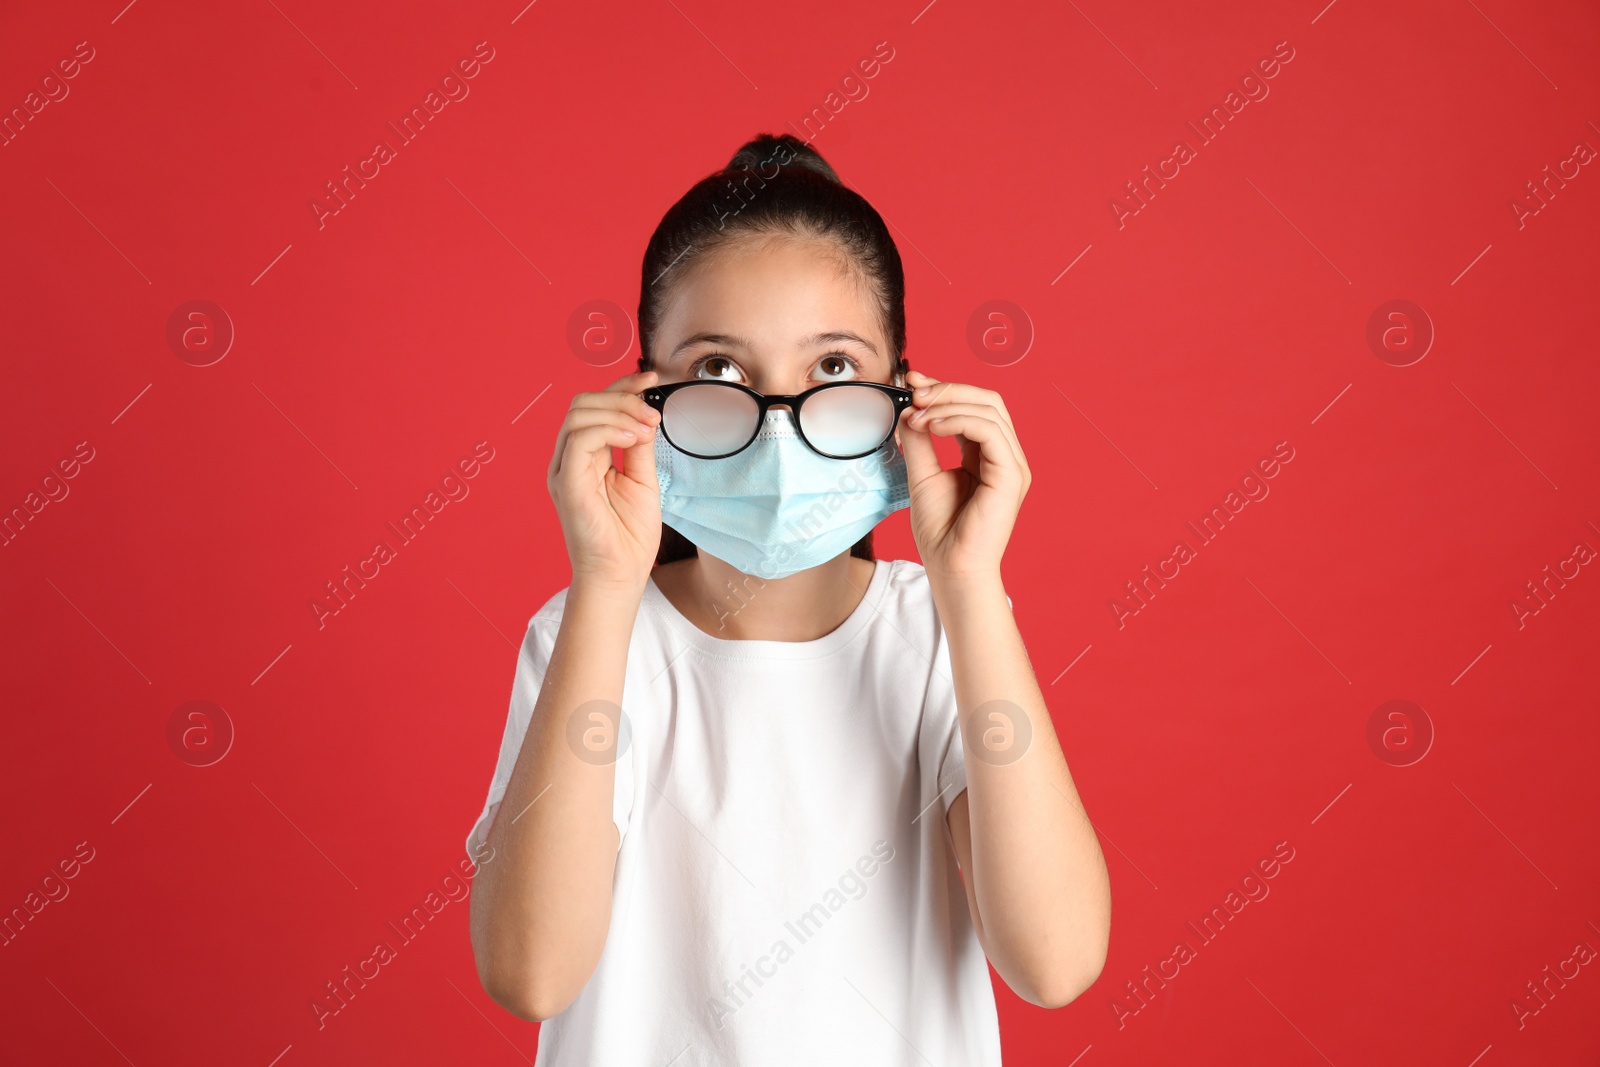 Photo of Little girl wiping foggy glasses caused by wearing medical face mask on red background. Protective measure during coronavirus pandemic